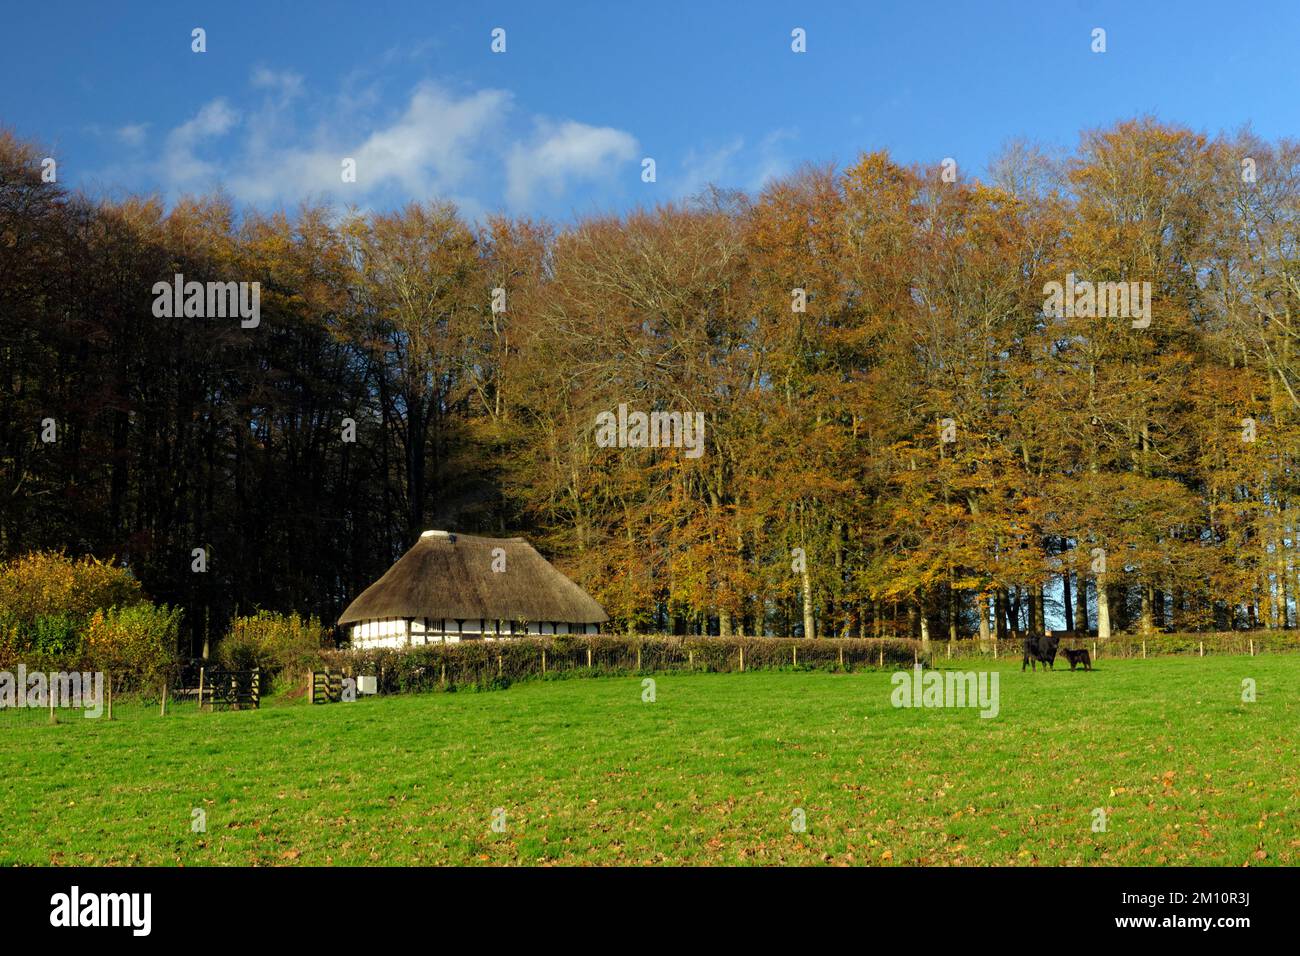 Abernodwydd farmhouse, St Fagans National History museum , Cardiff, Wales. Stock Photo